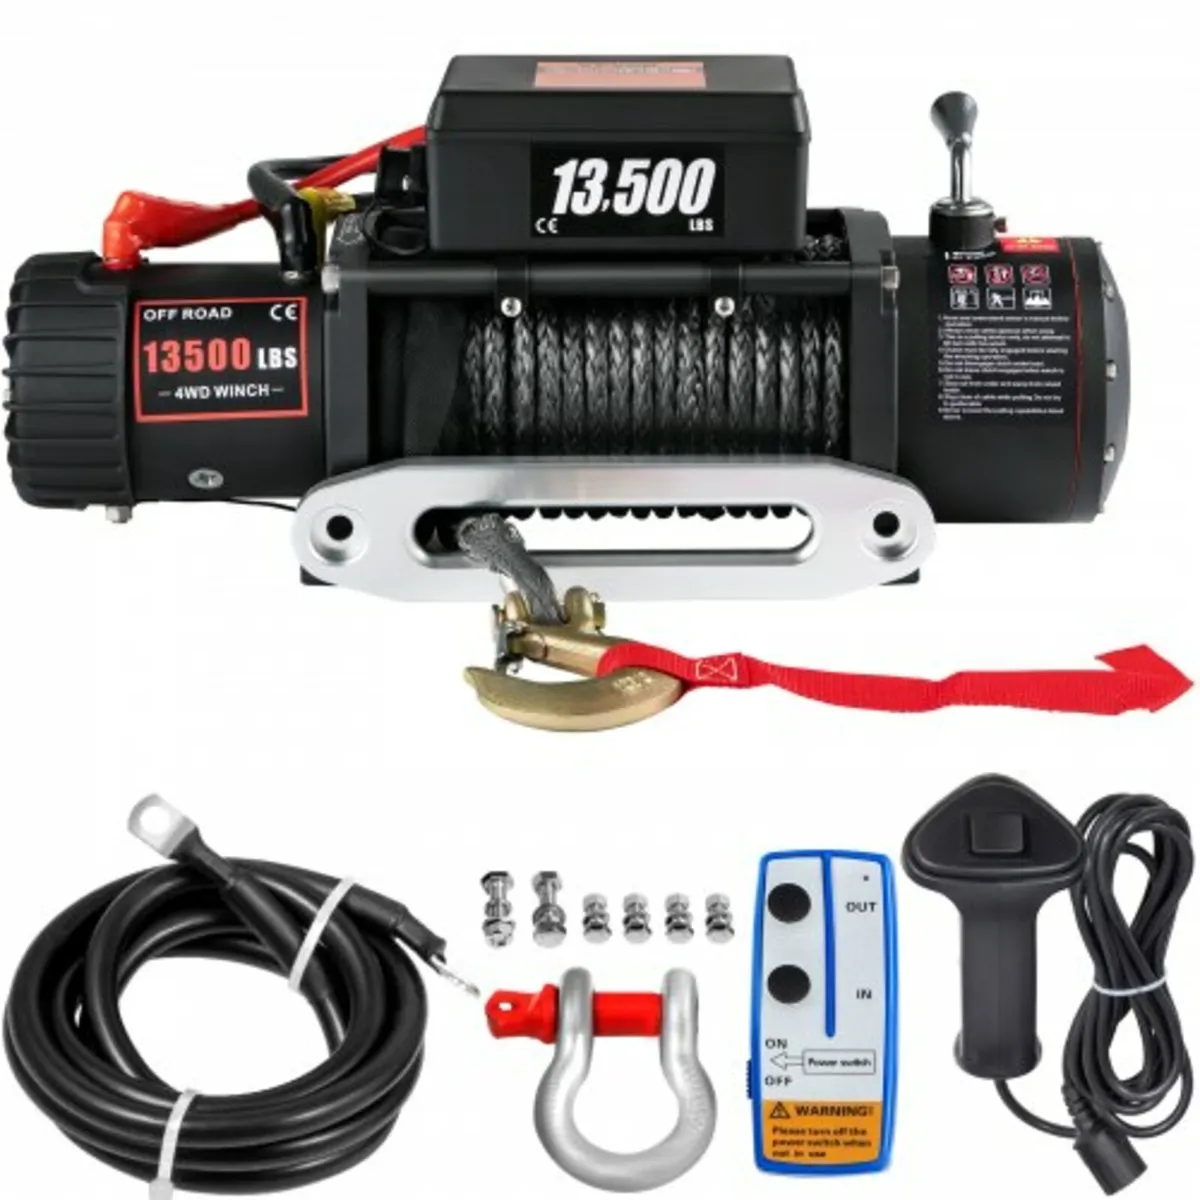 13500 LBS Electric Truck Winch12v Electric Winch A